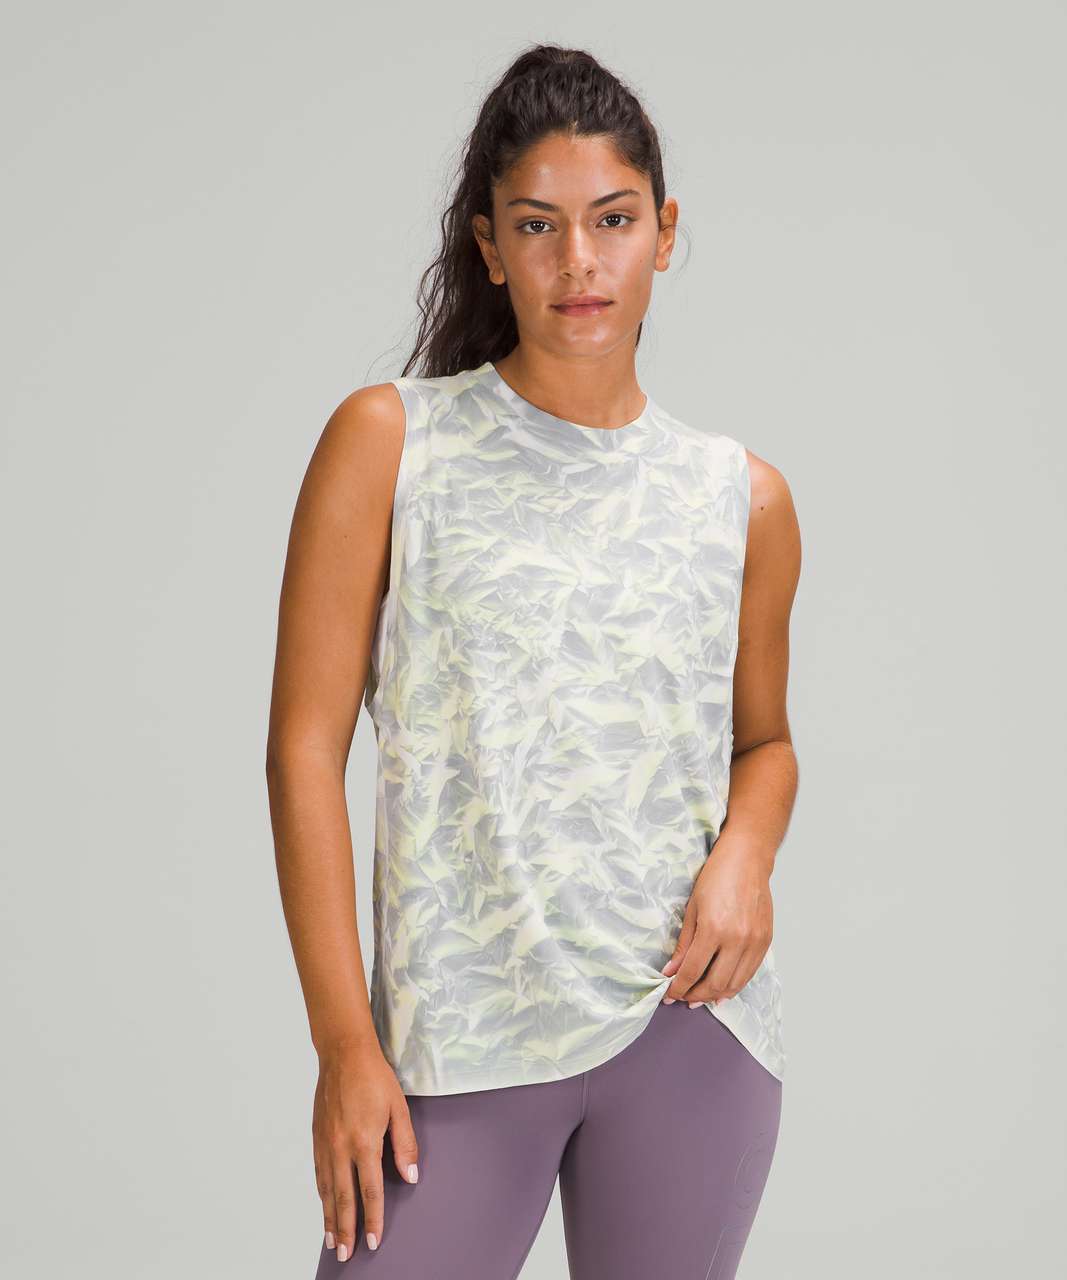 Lululemon SeaWheeze All Yours Tank Top - Origami Wash Clear Mint Rhino Grey